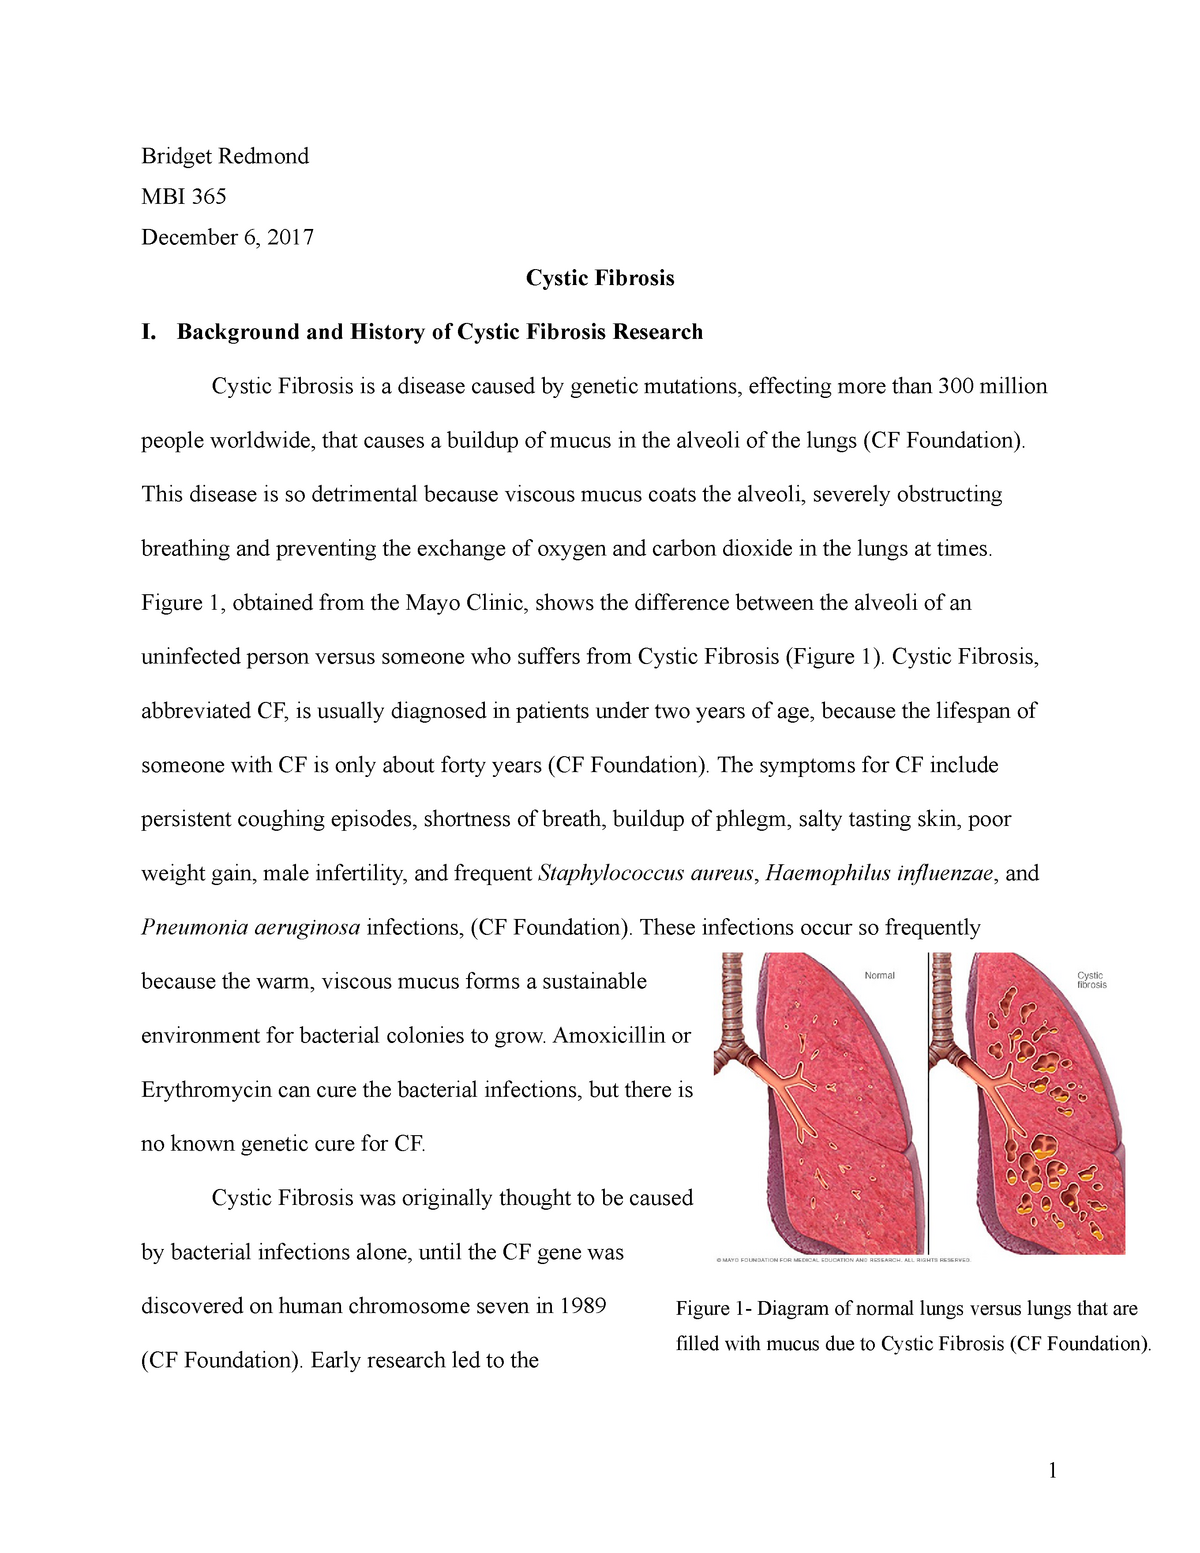 cystic fibrosis research paper